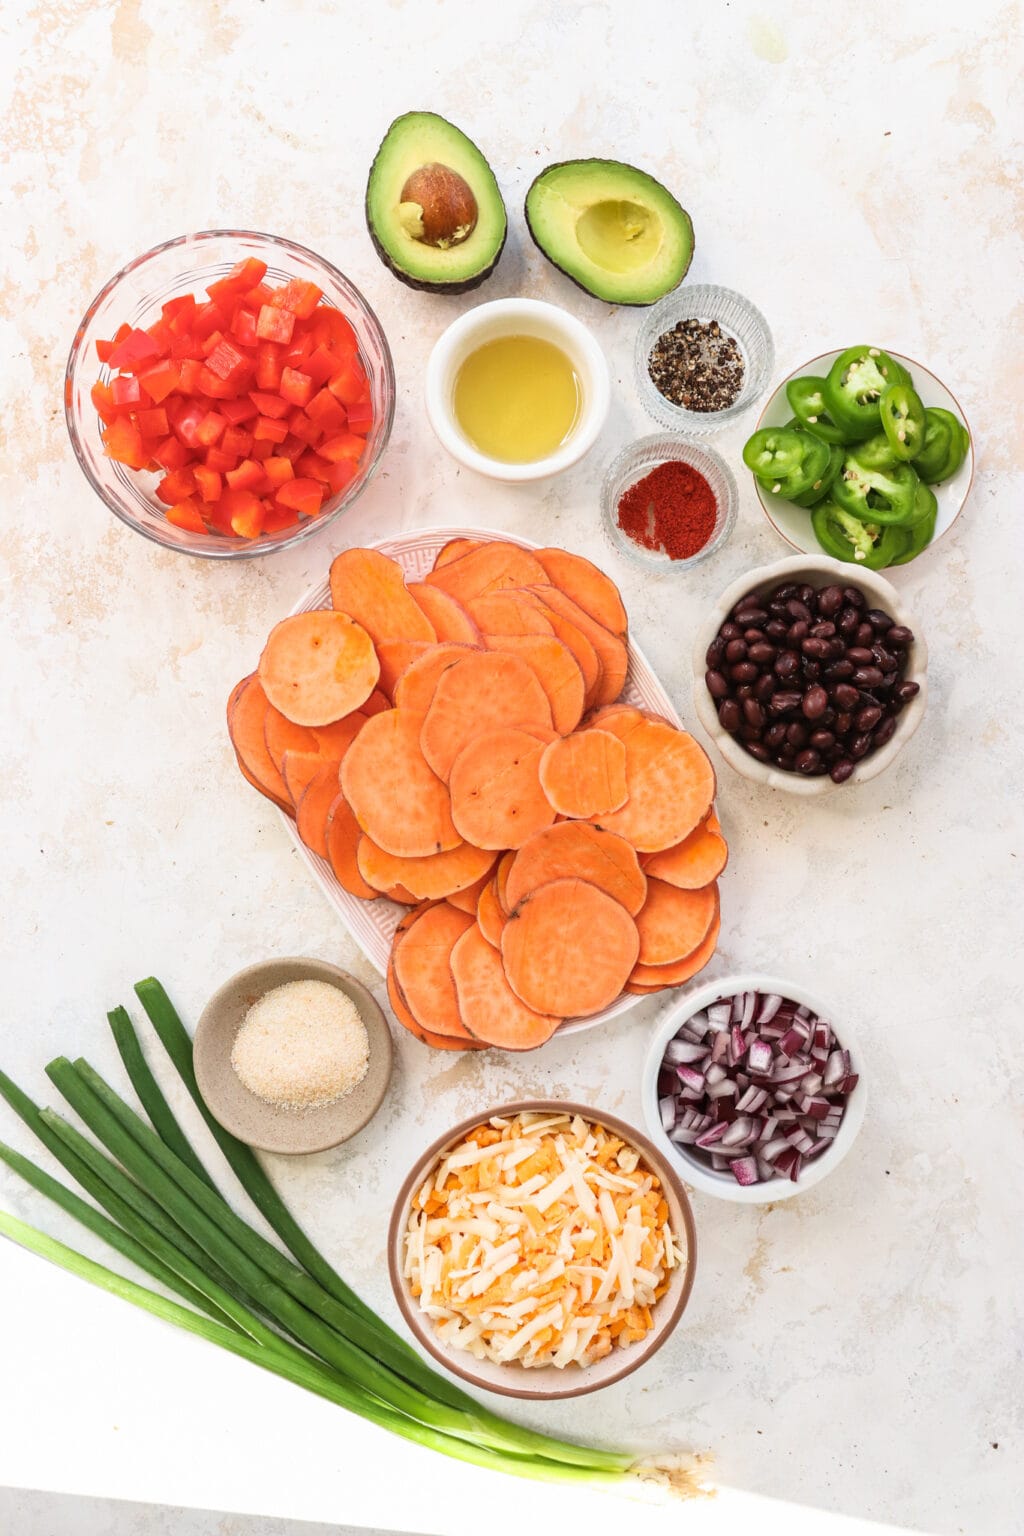 Ingredients for Healthy Black Bean & Bell Pepper Sweet Potato Nachos, including sweet potatoes, avocado oil, pepper, paprika, garlic salt, nacho cheese blend, black beans, bell peppers, red onion, jalapeno, green onion, avocado, sour cream, salsa